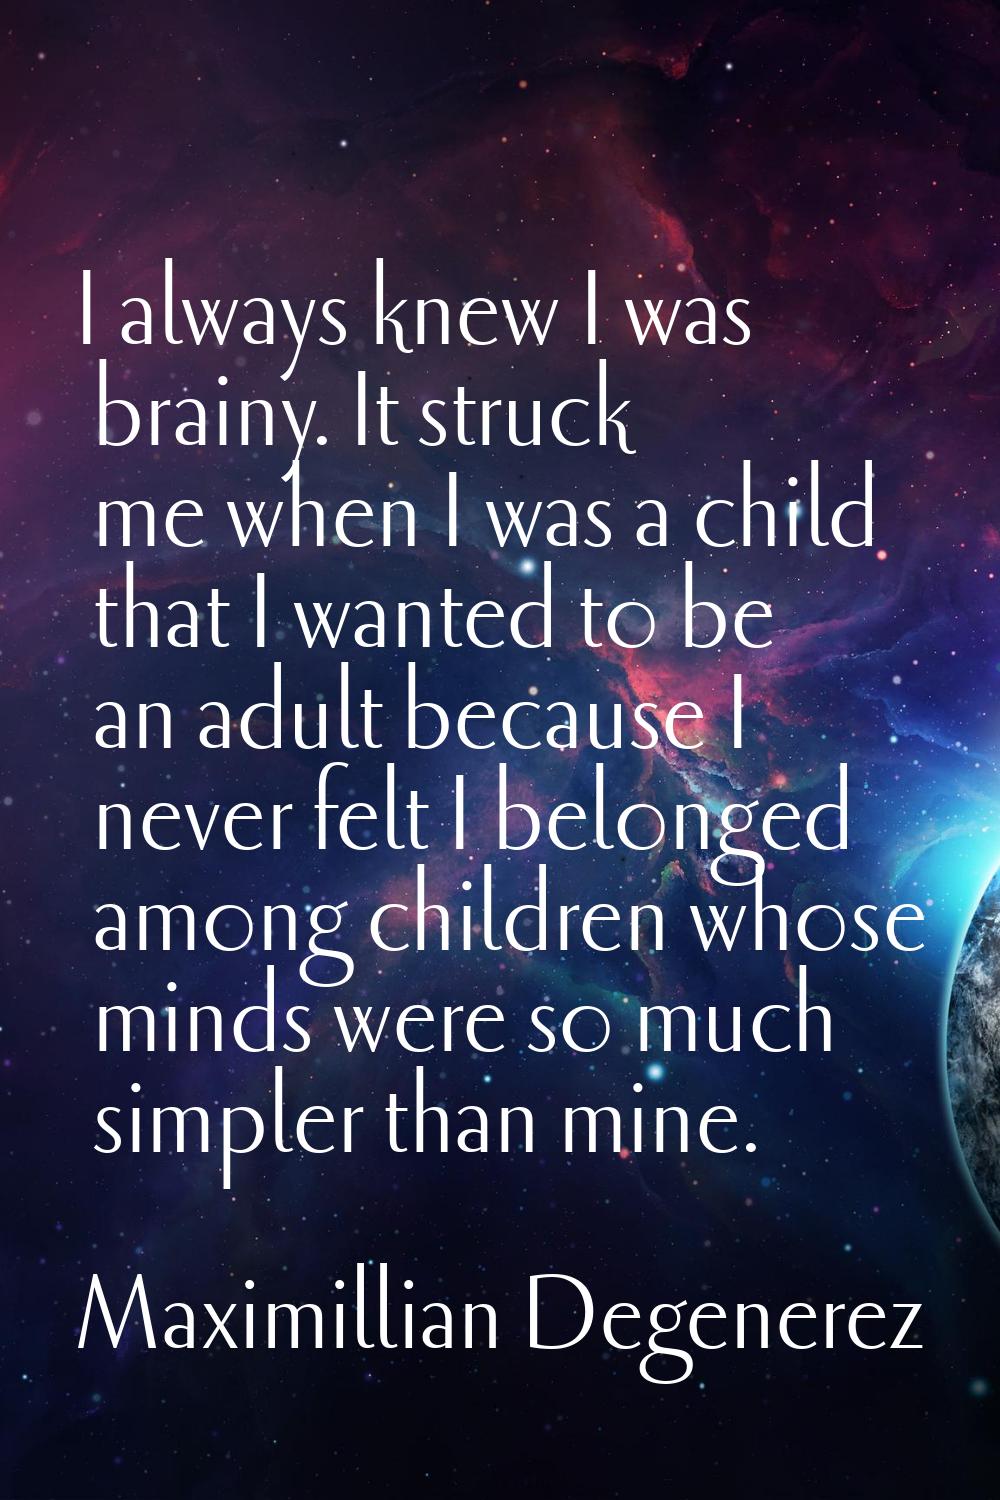 I always knew I was brainy. It struck me when I was a child that I wanted to be an adult because I 